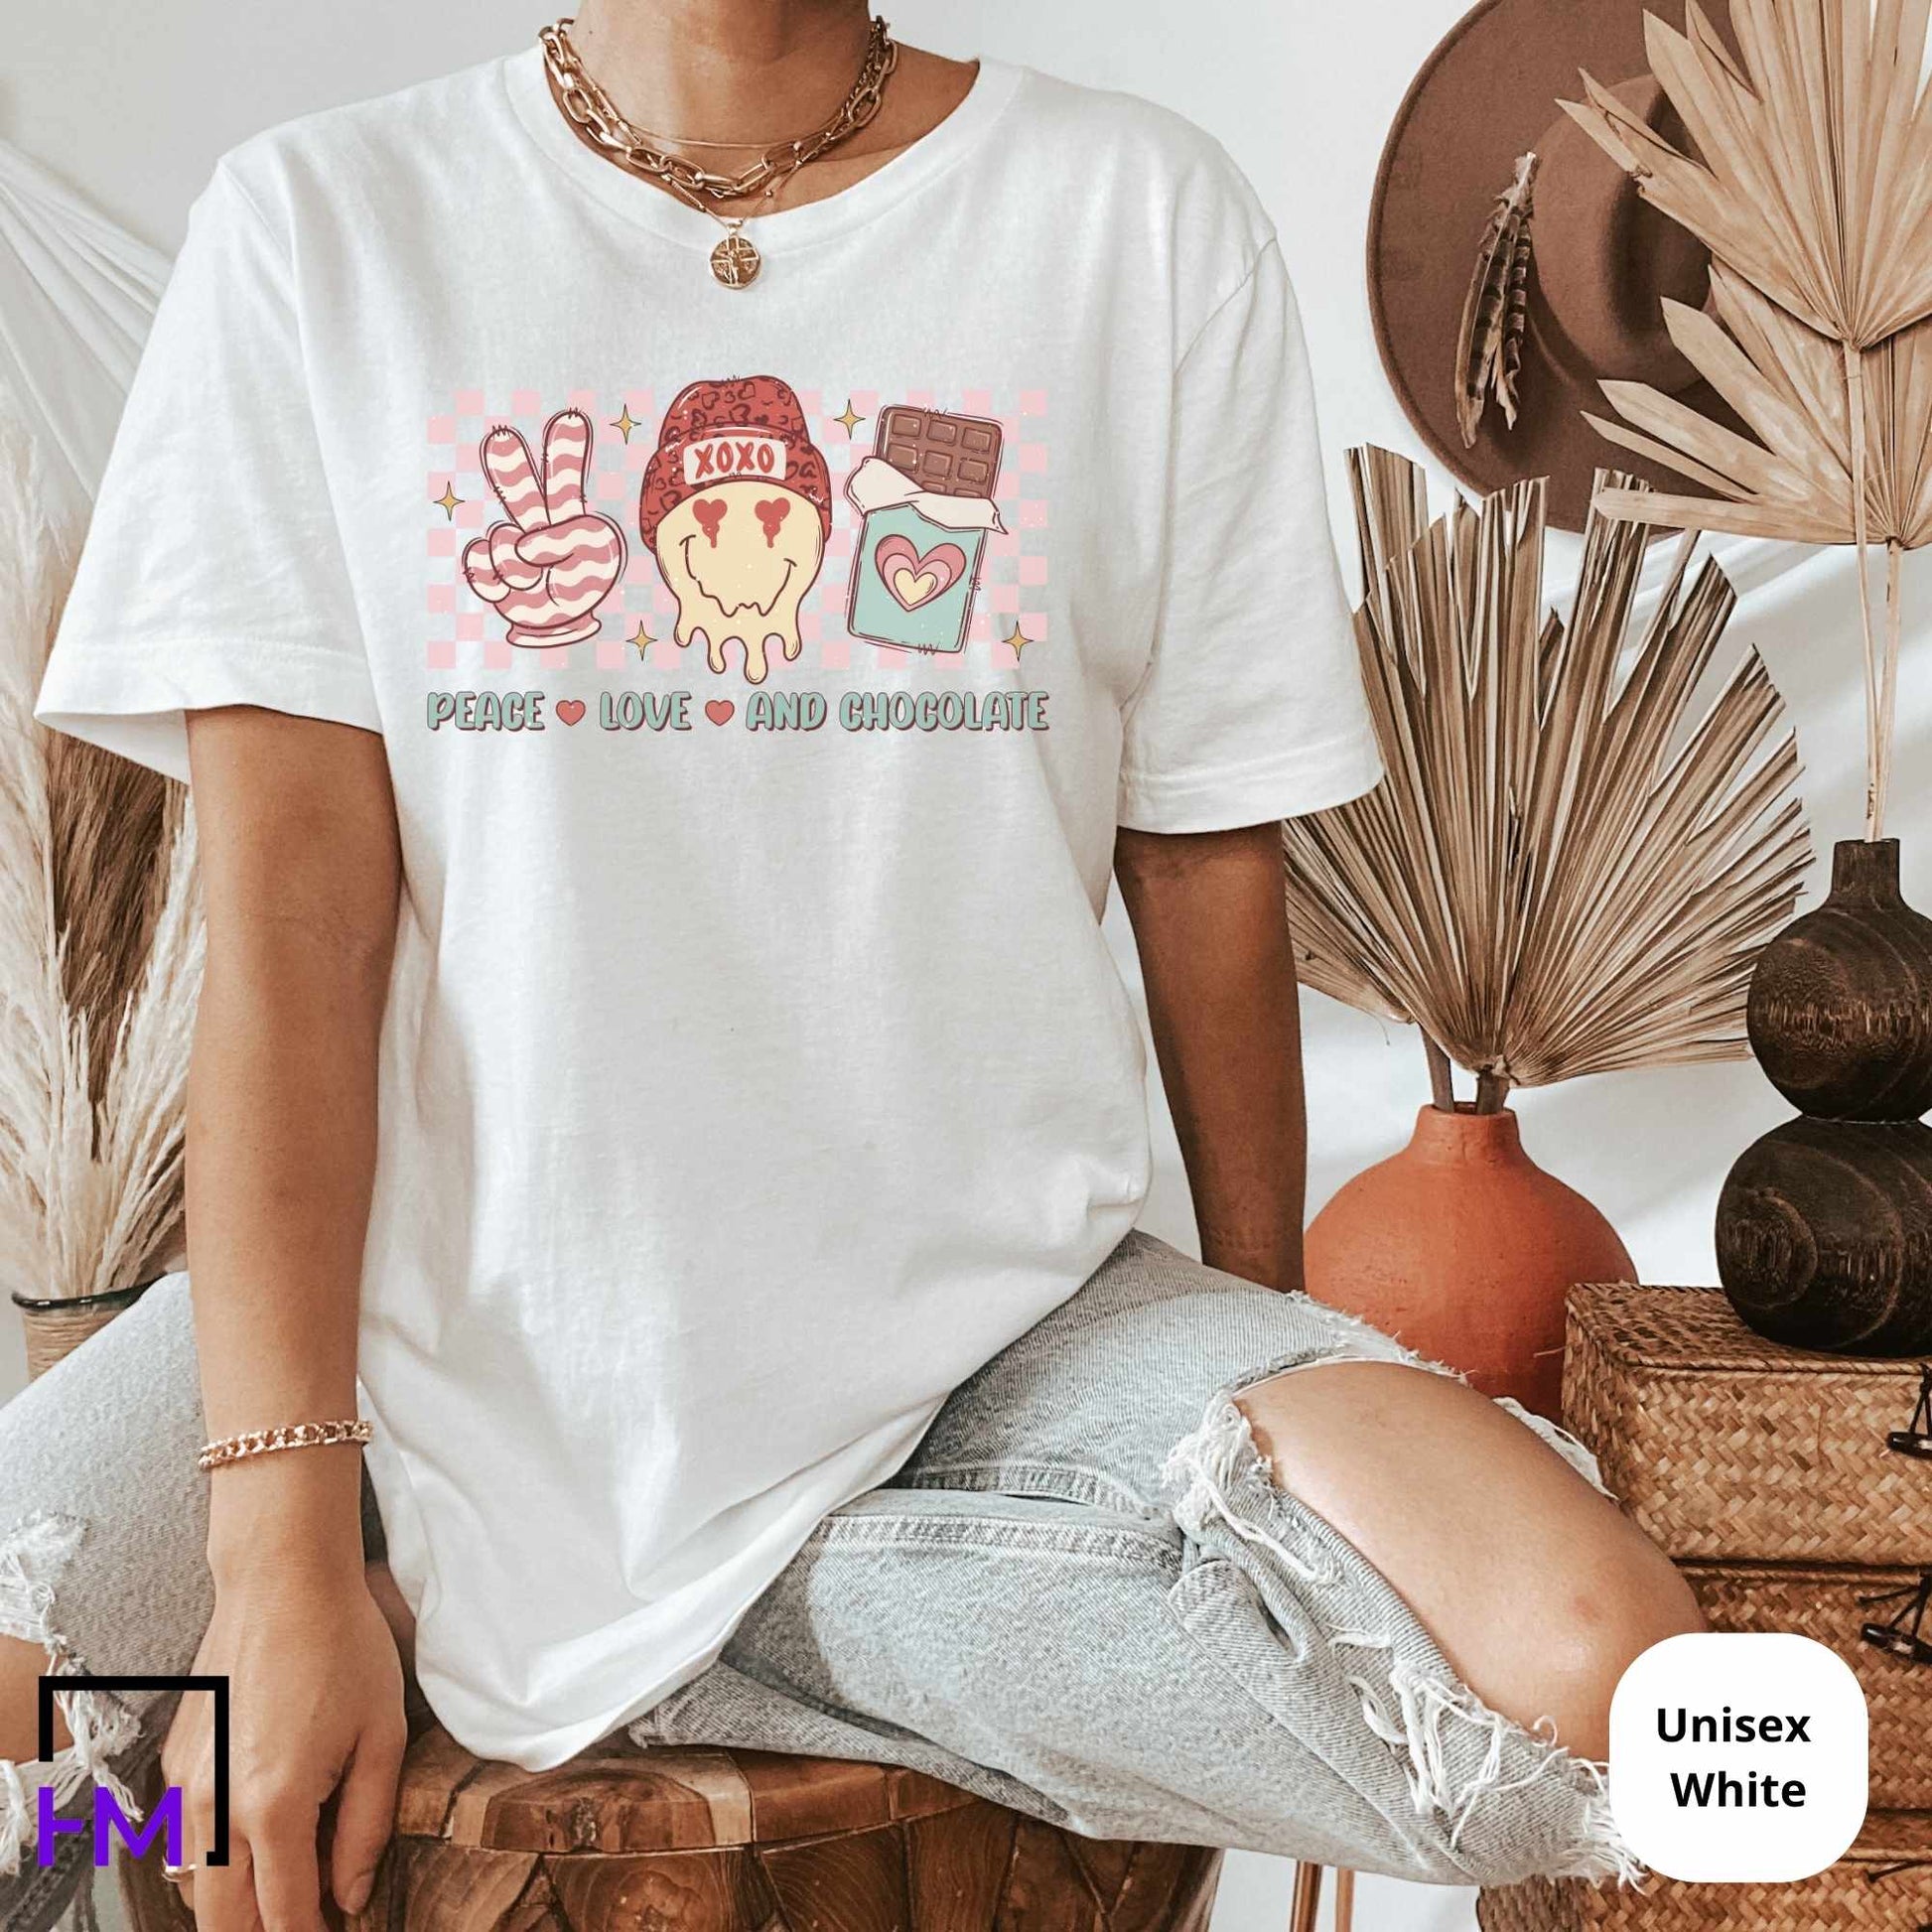 Peace, Love and Chocolate, Chocolate Lover's Shirt, Retro Hippie Valentines Day Gift HMDesignStudioUS